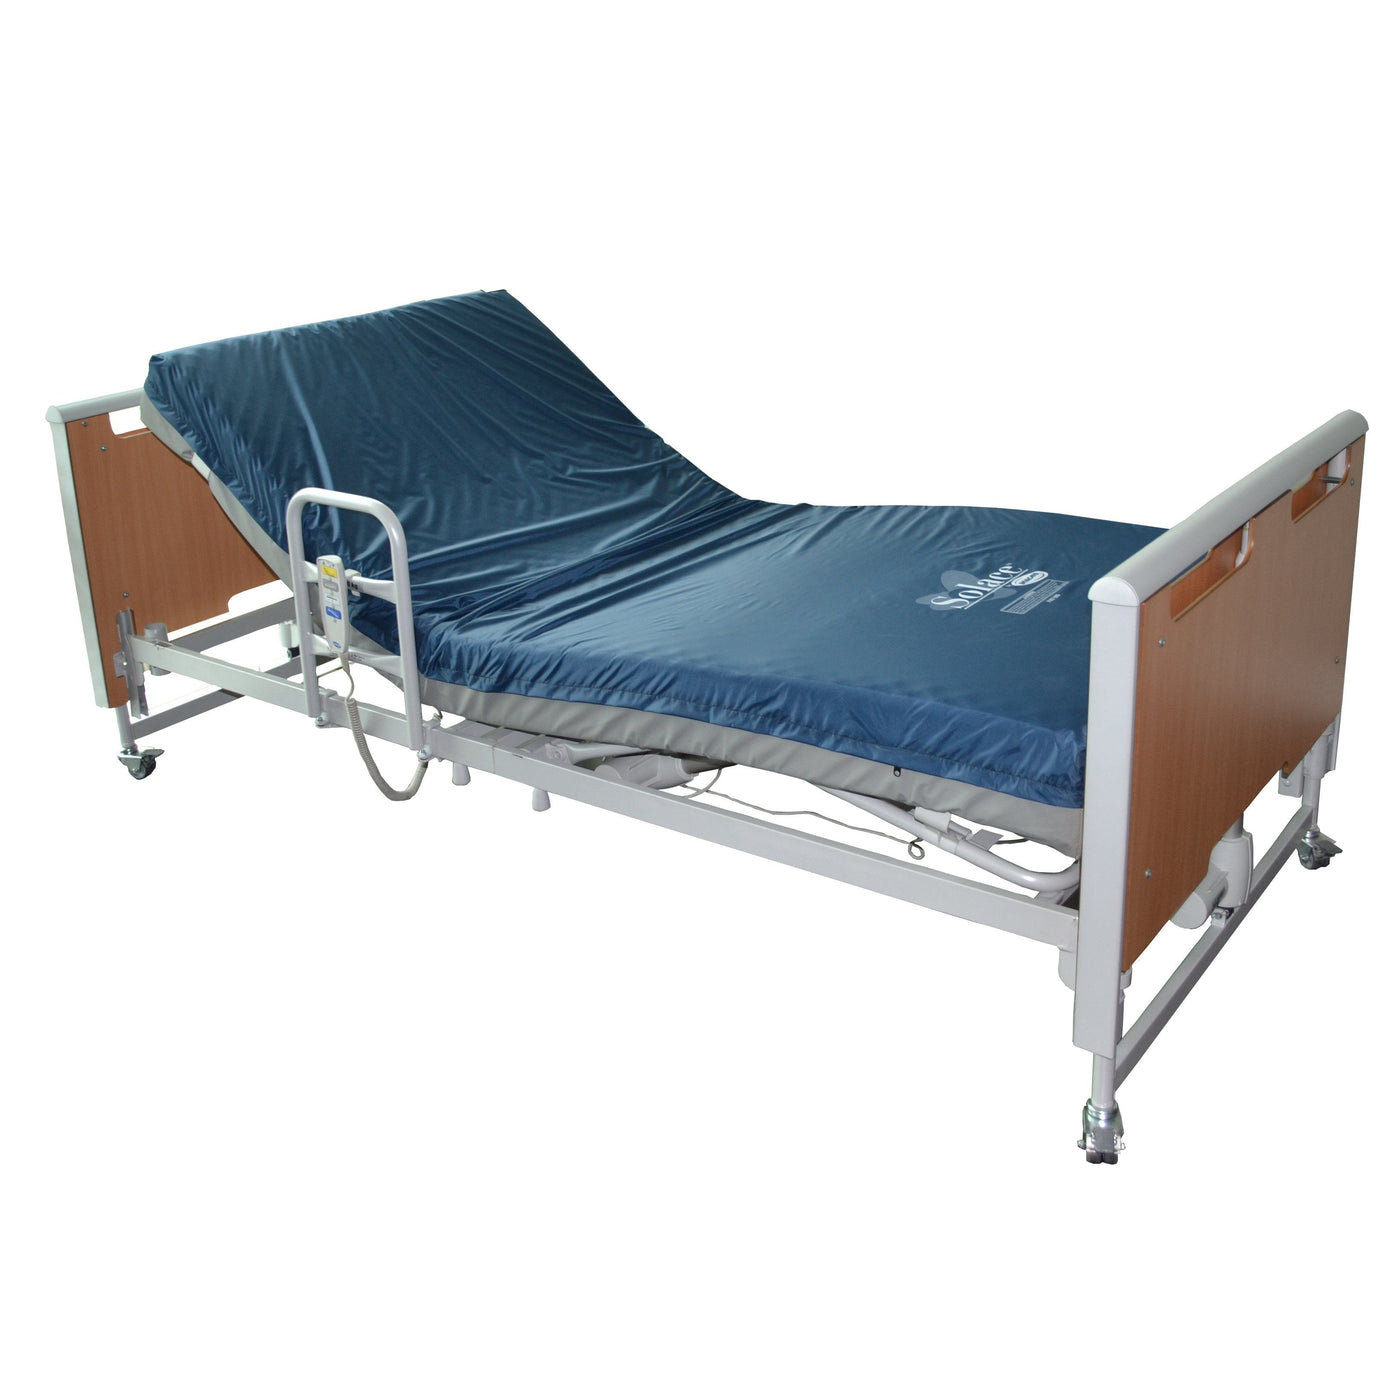 Invacare 5410LOW Full Electric Low Hospital Bed with Mattress and Rails